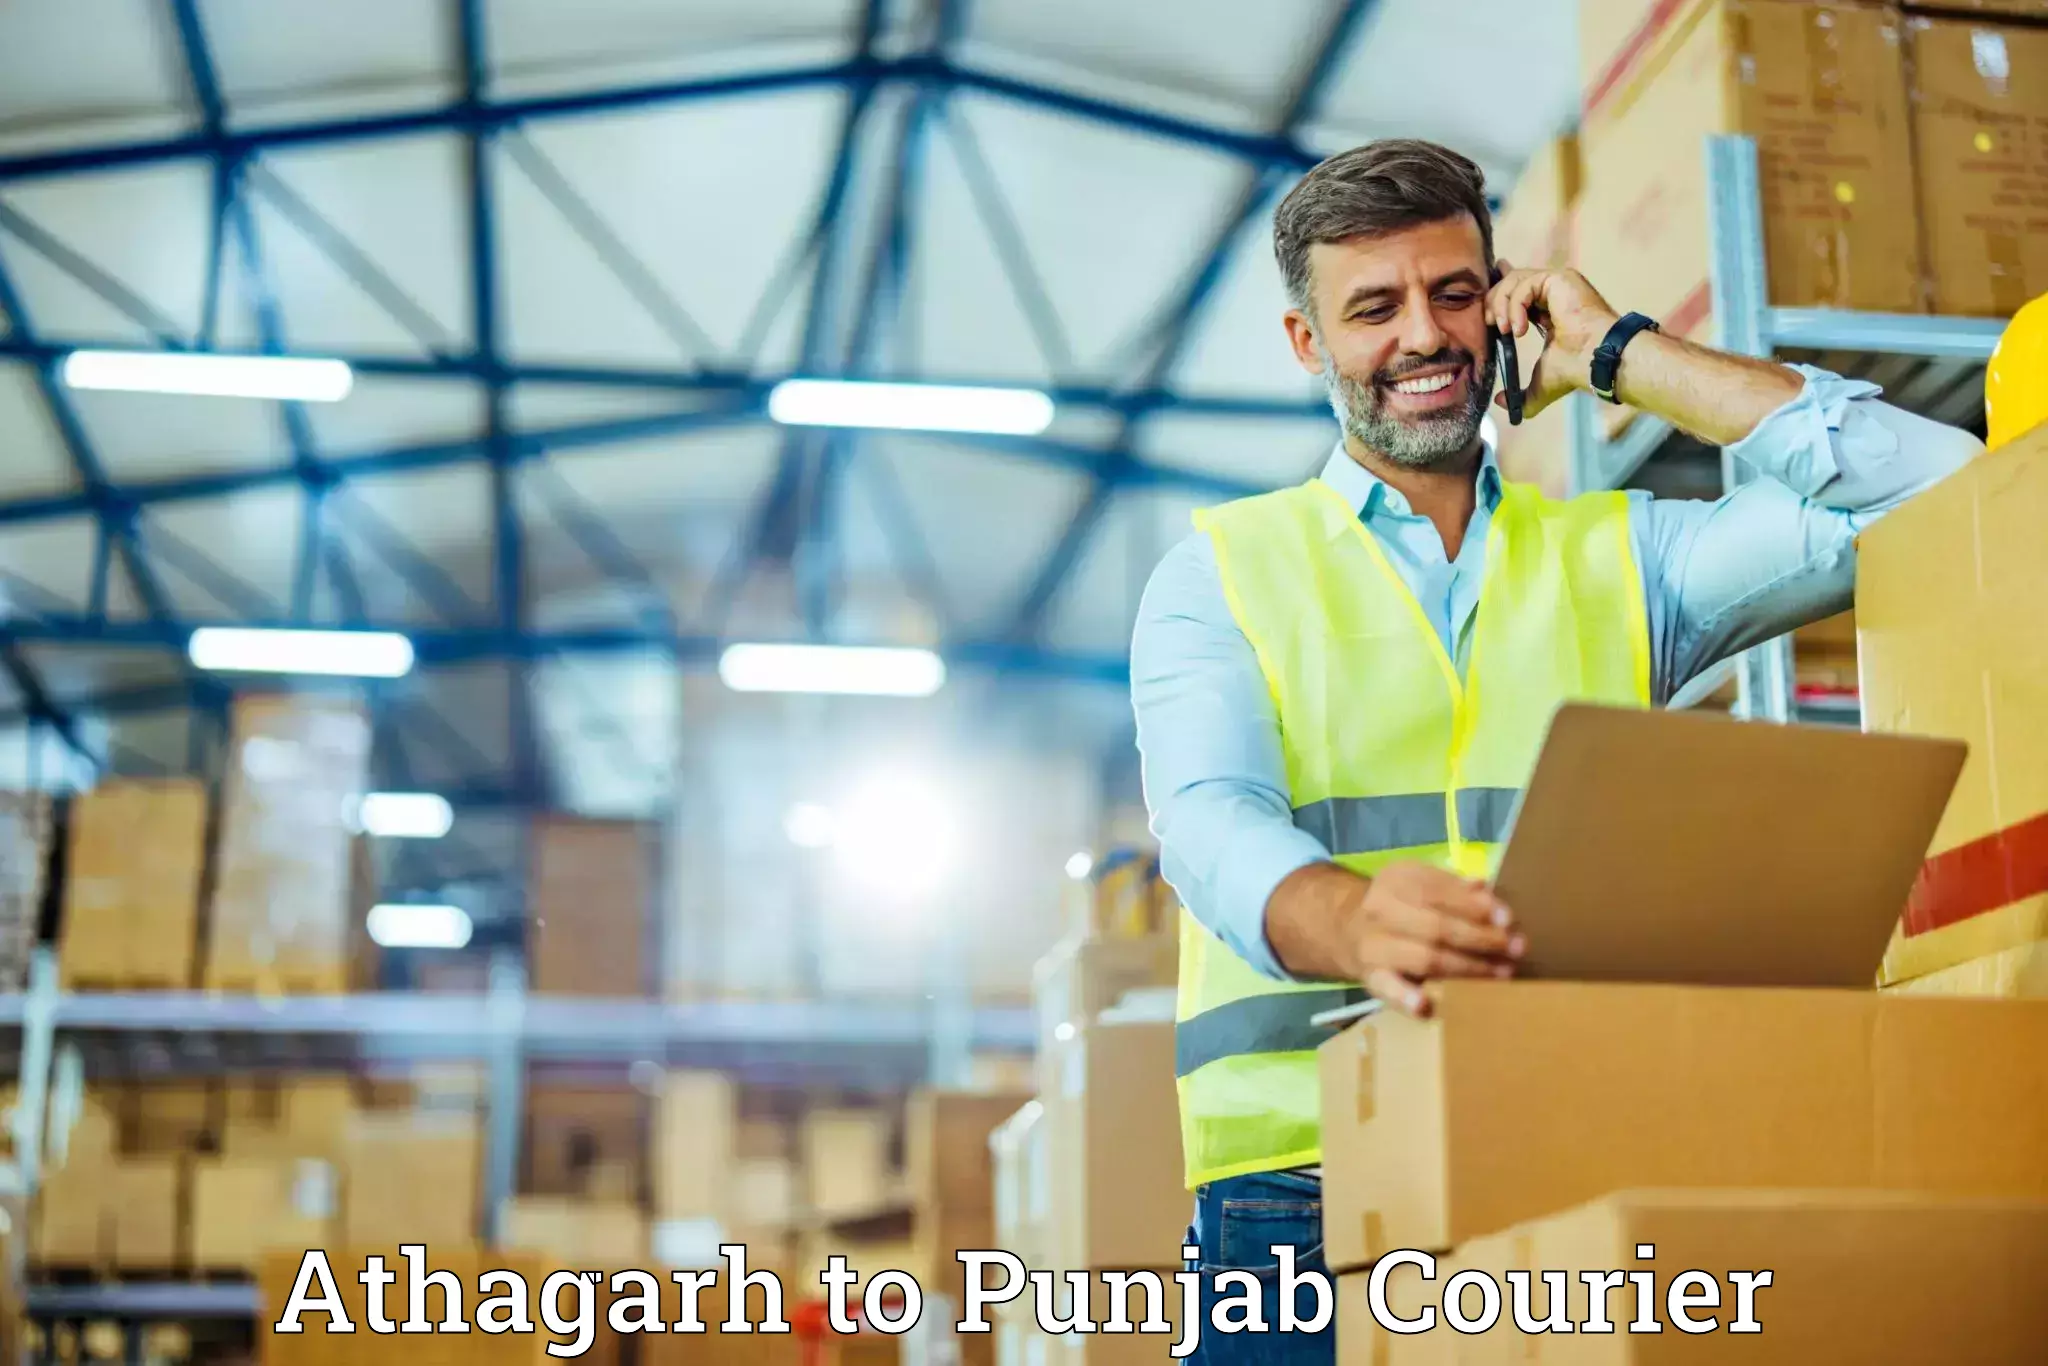 Trusted relocation services Athagarh to Faridkot